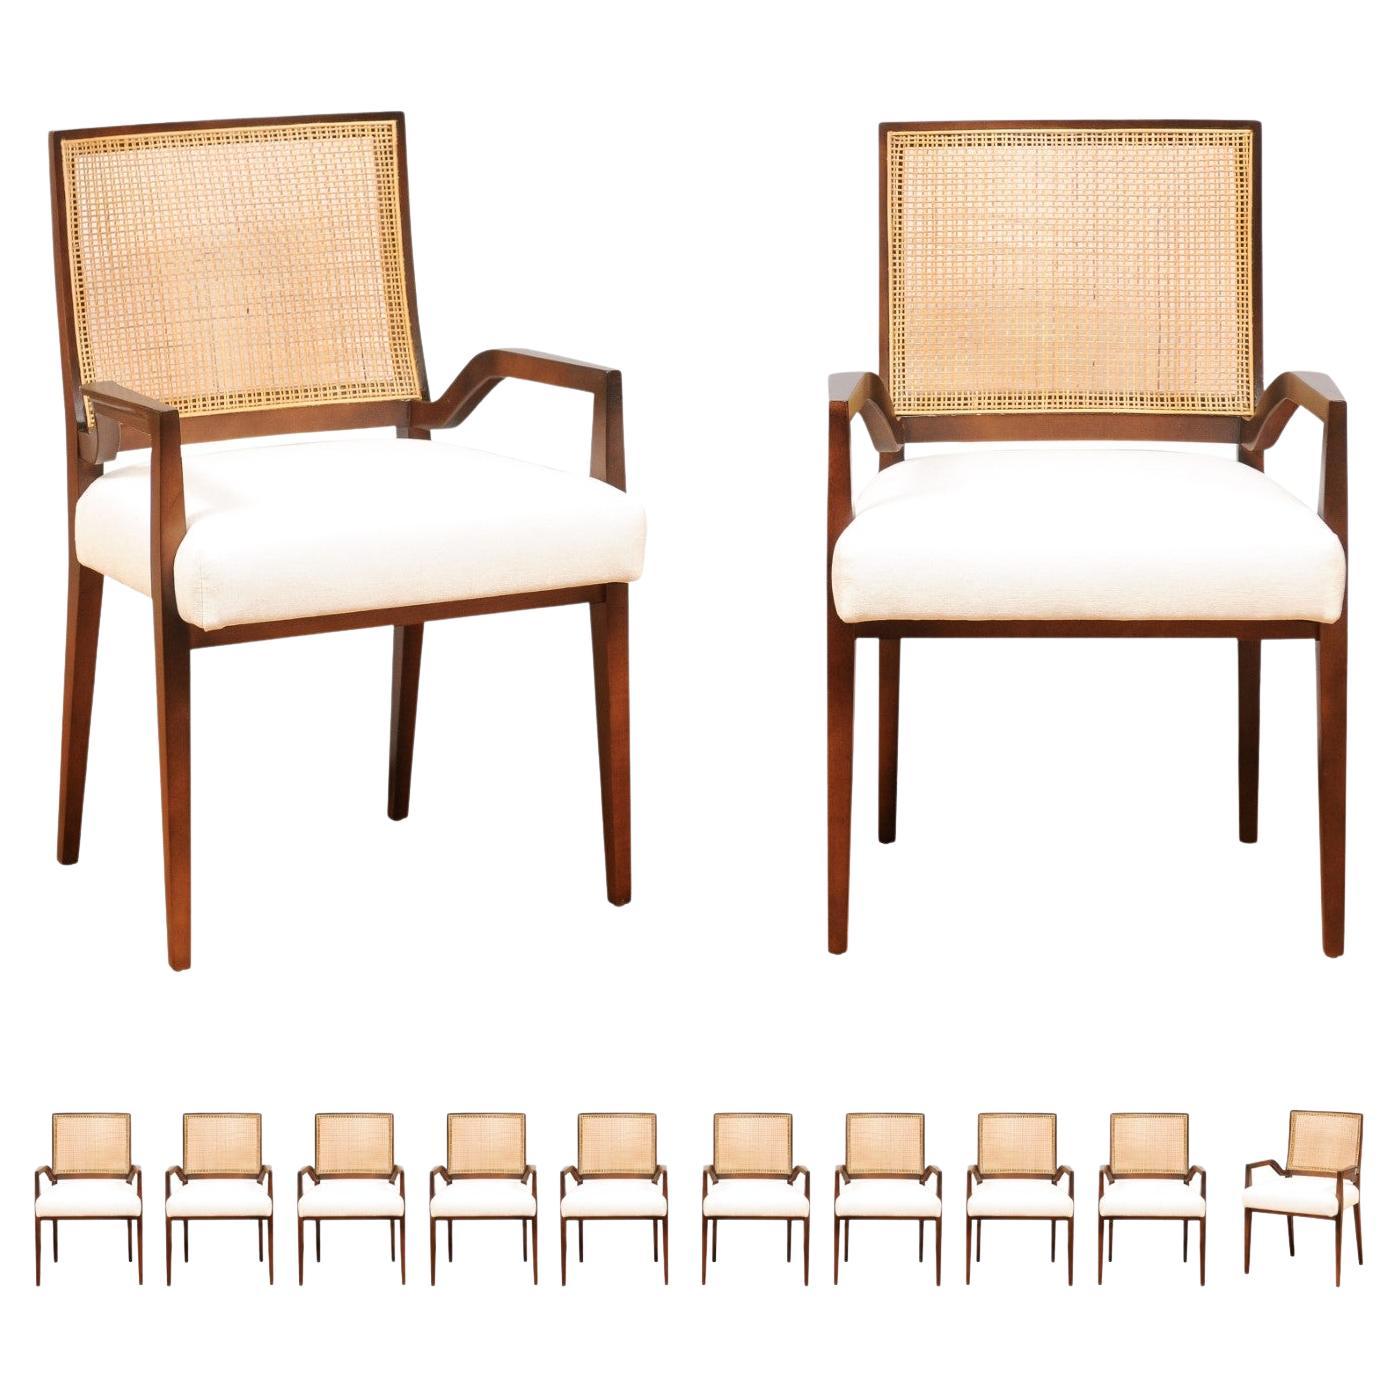 This large ALL ARMS set of impossible to find seating examples is unique on the World market. These magnificent dining chairs are shipped as professionally photographed and described in the listing narrative, completely installation ready. Seats may